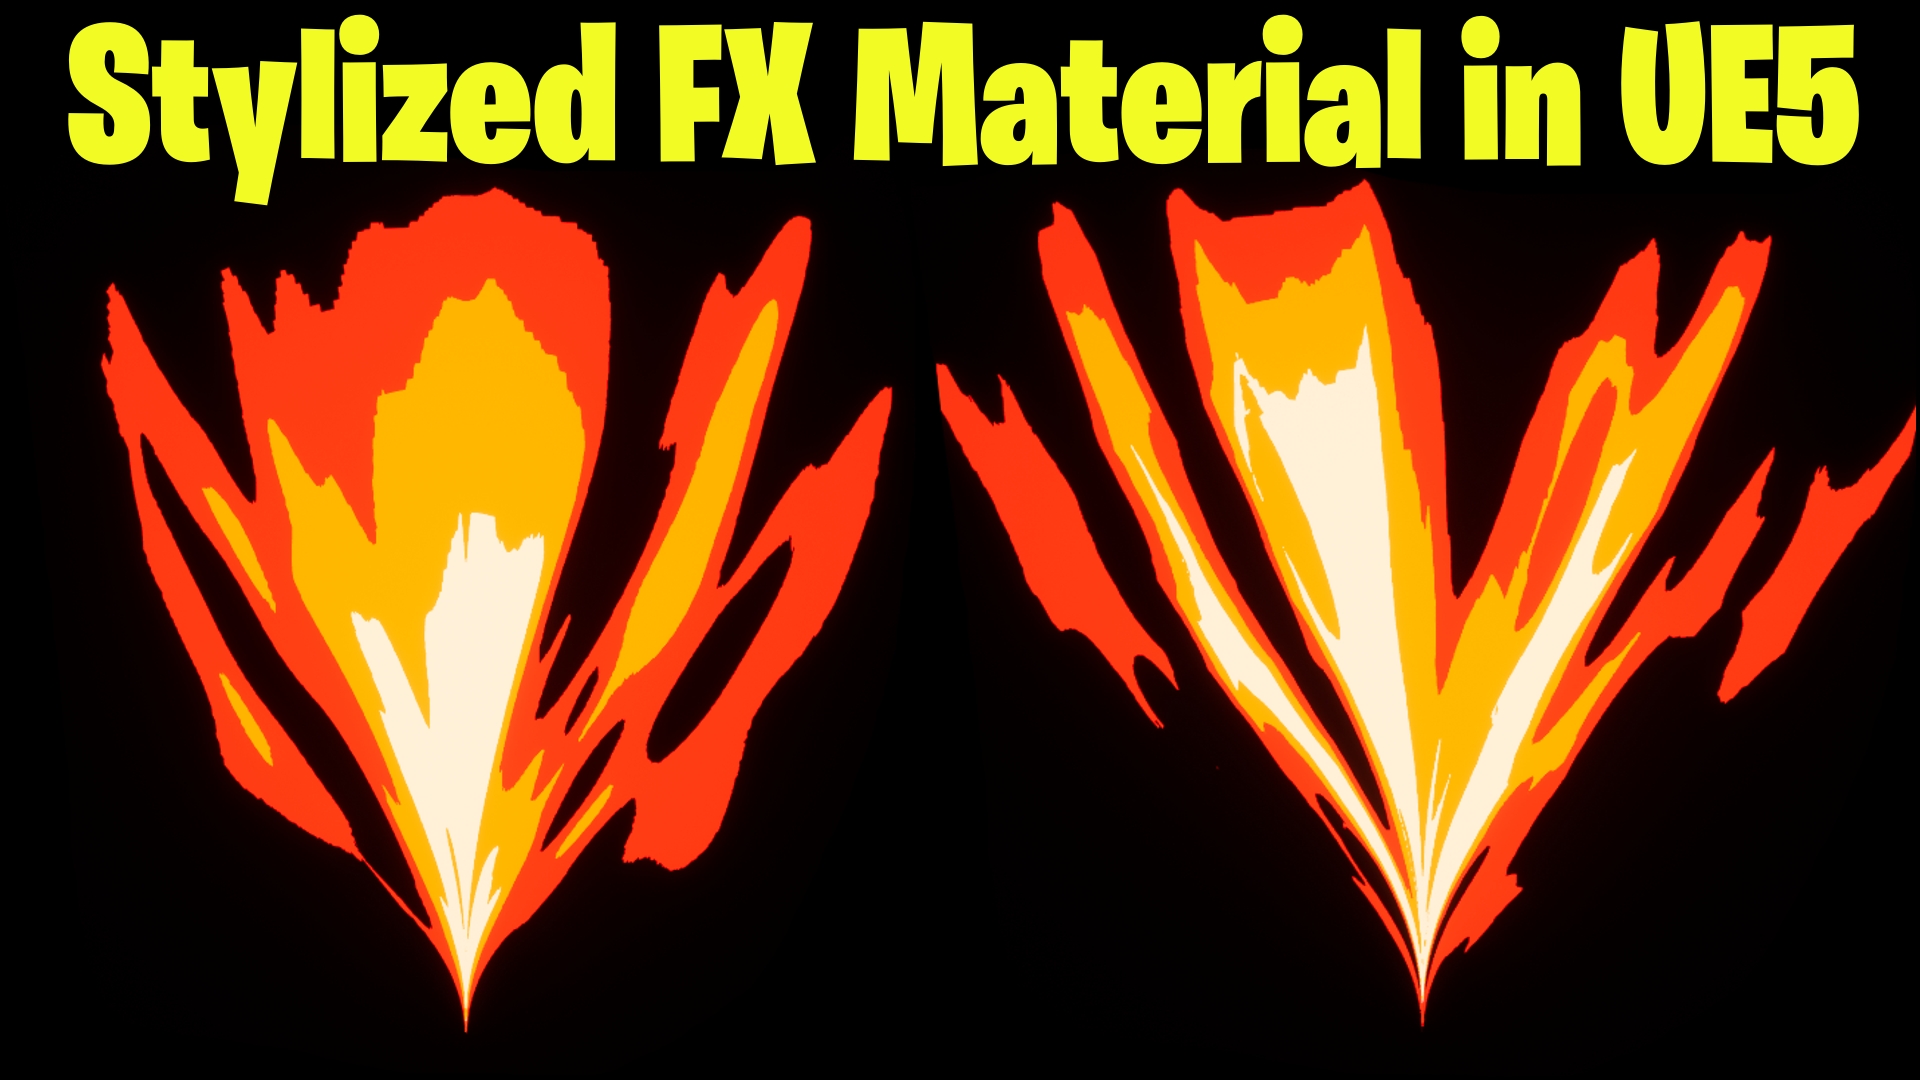 Stylized FX Material in UE5 Tutorial